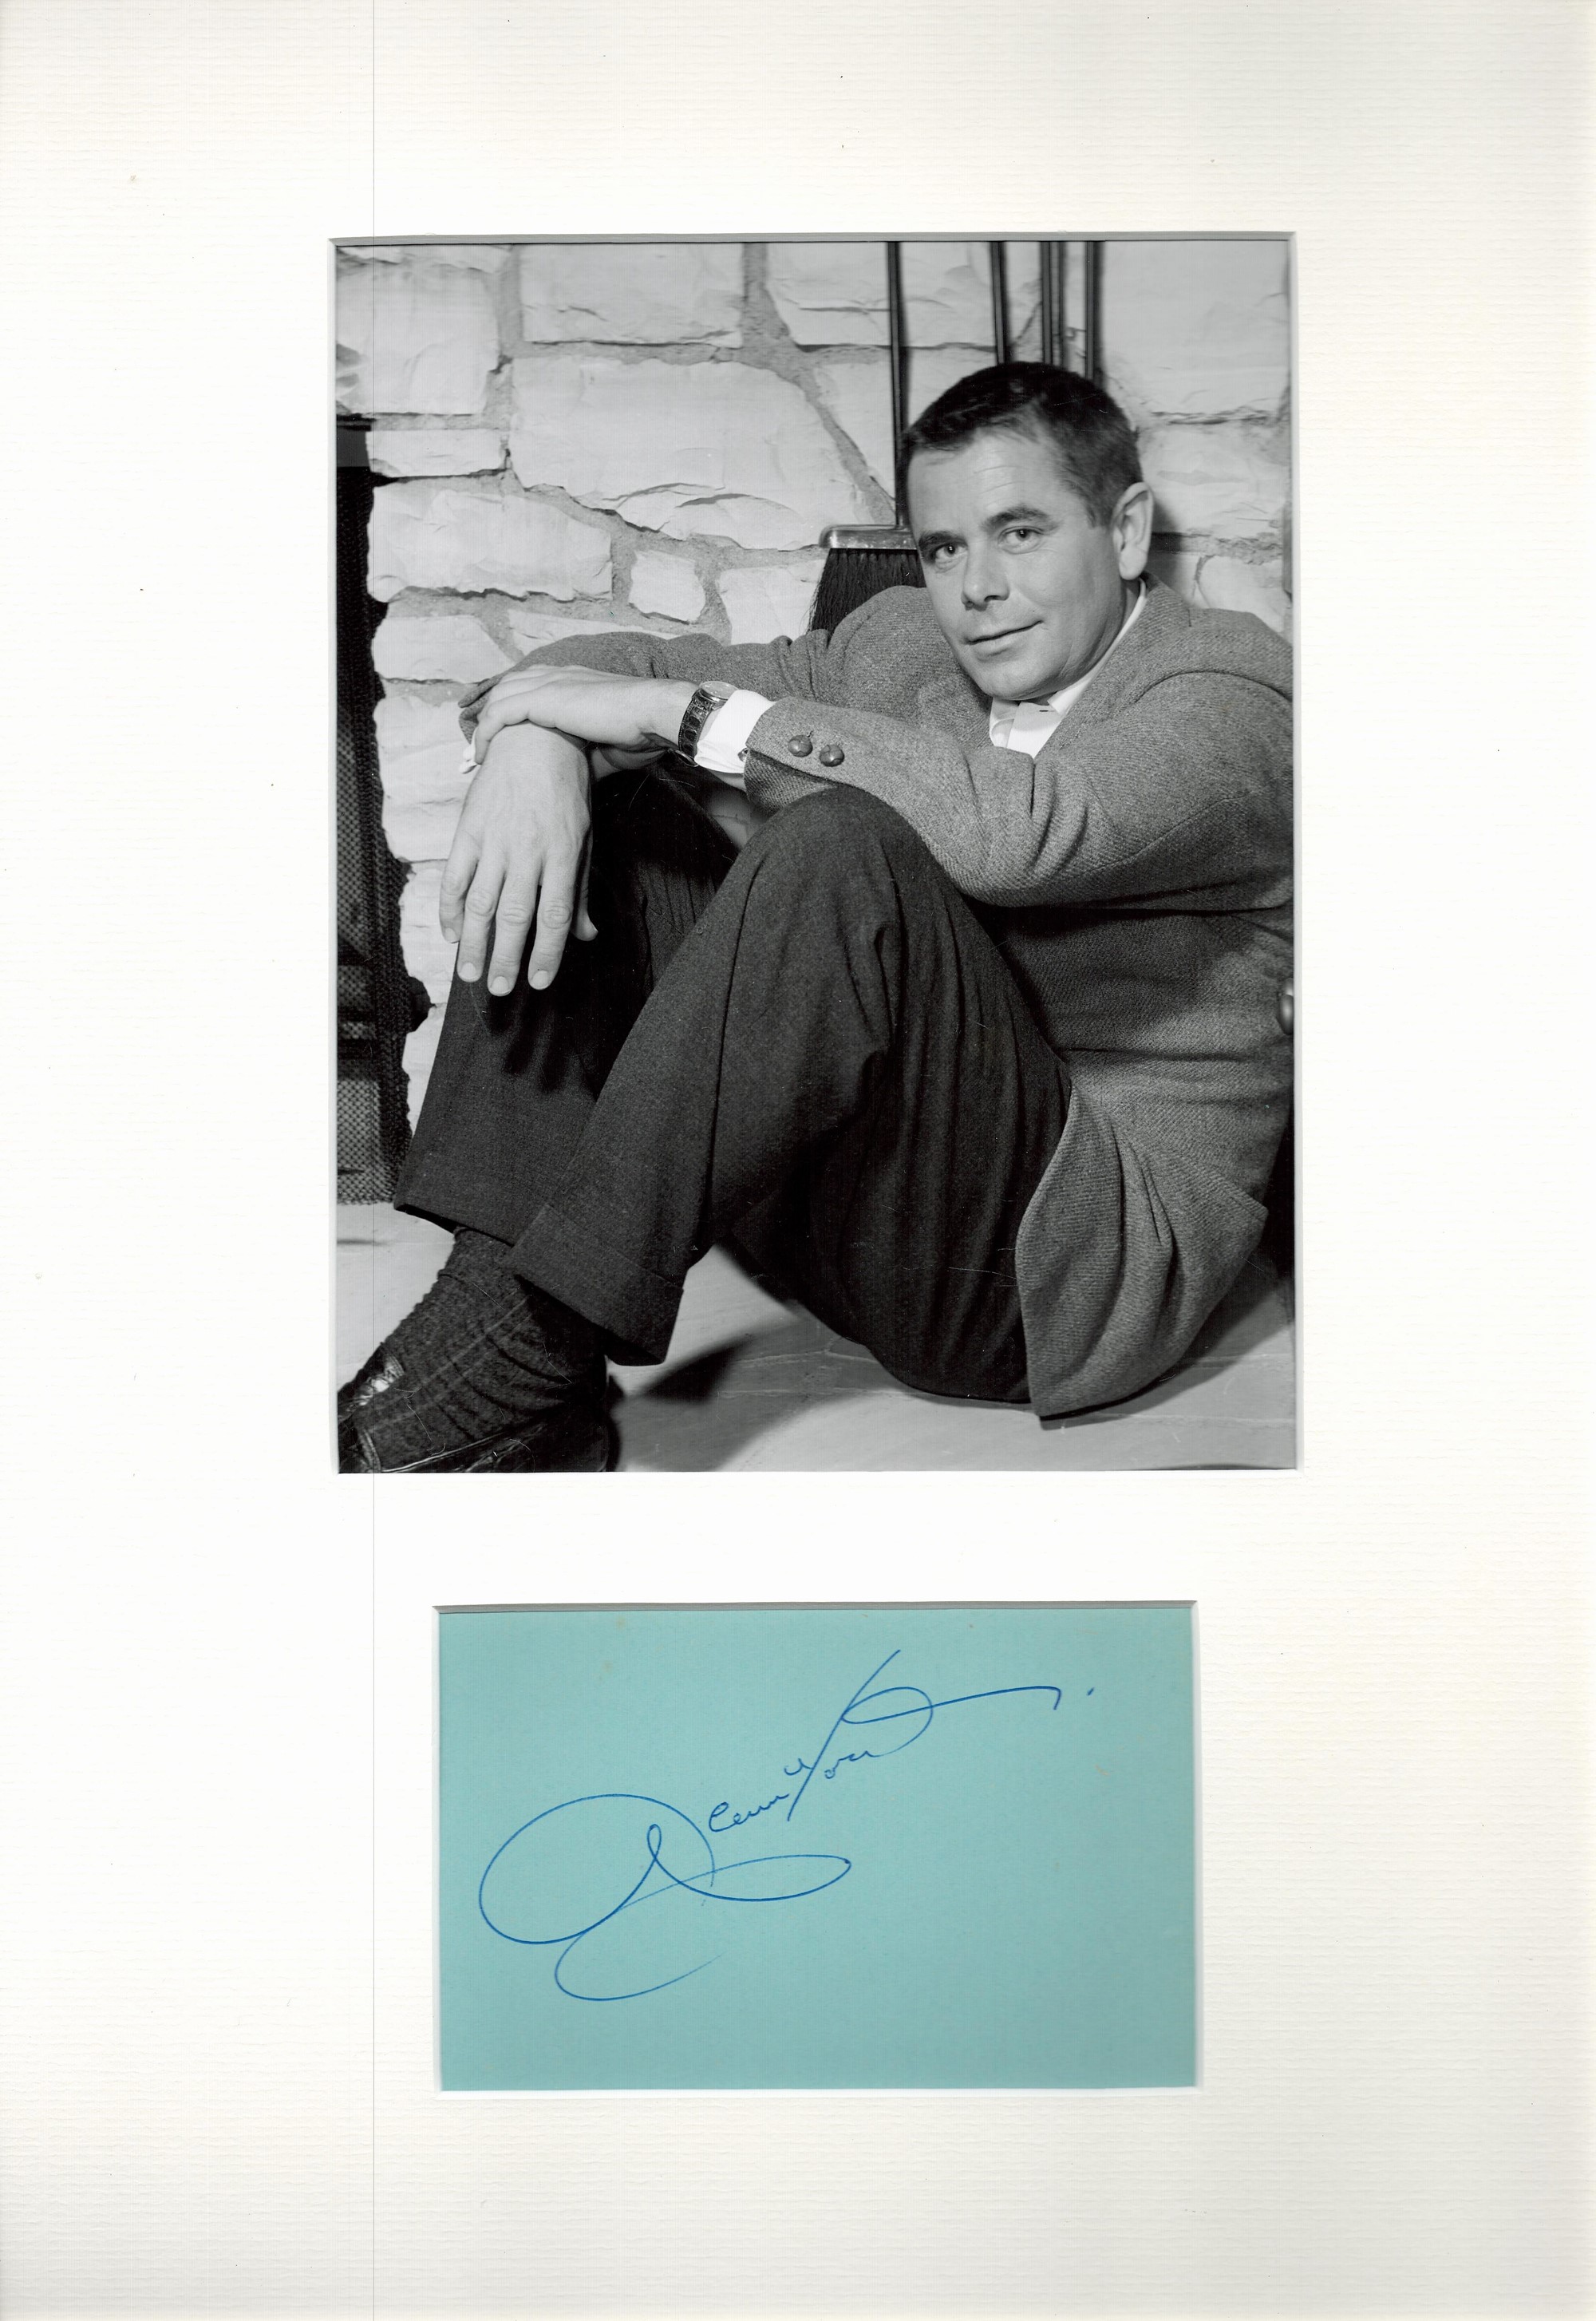 Glenn Ford 19x12 mounted signature piece includes signed album page and vintage black and white